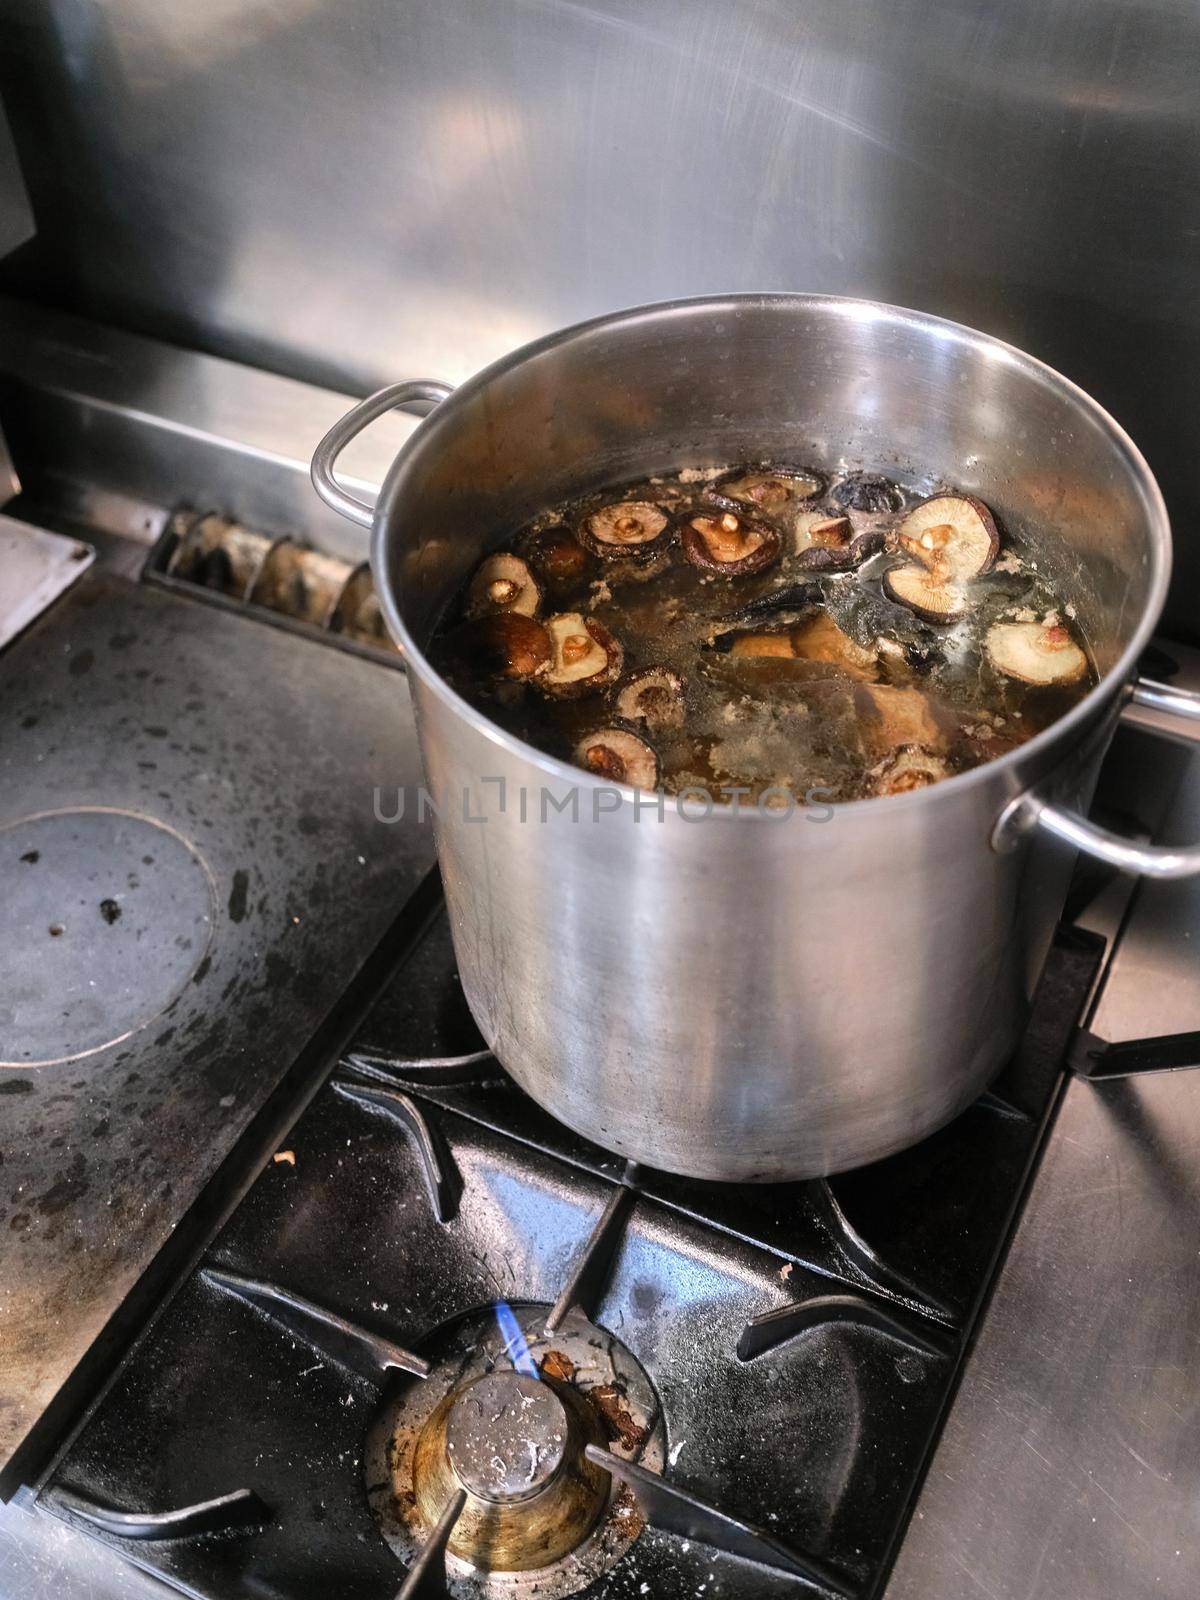 Vertical photo of a cooker of a restaurant with a pot of boiling mushrooms in it